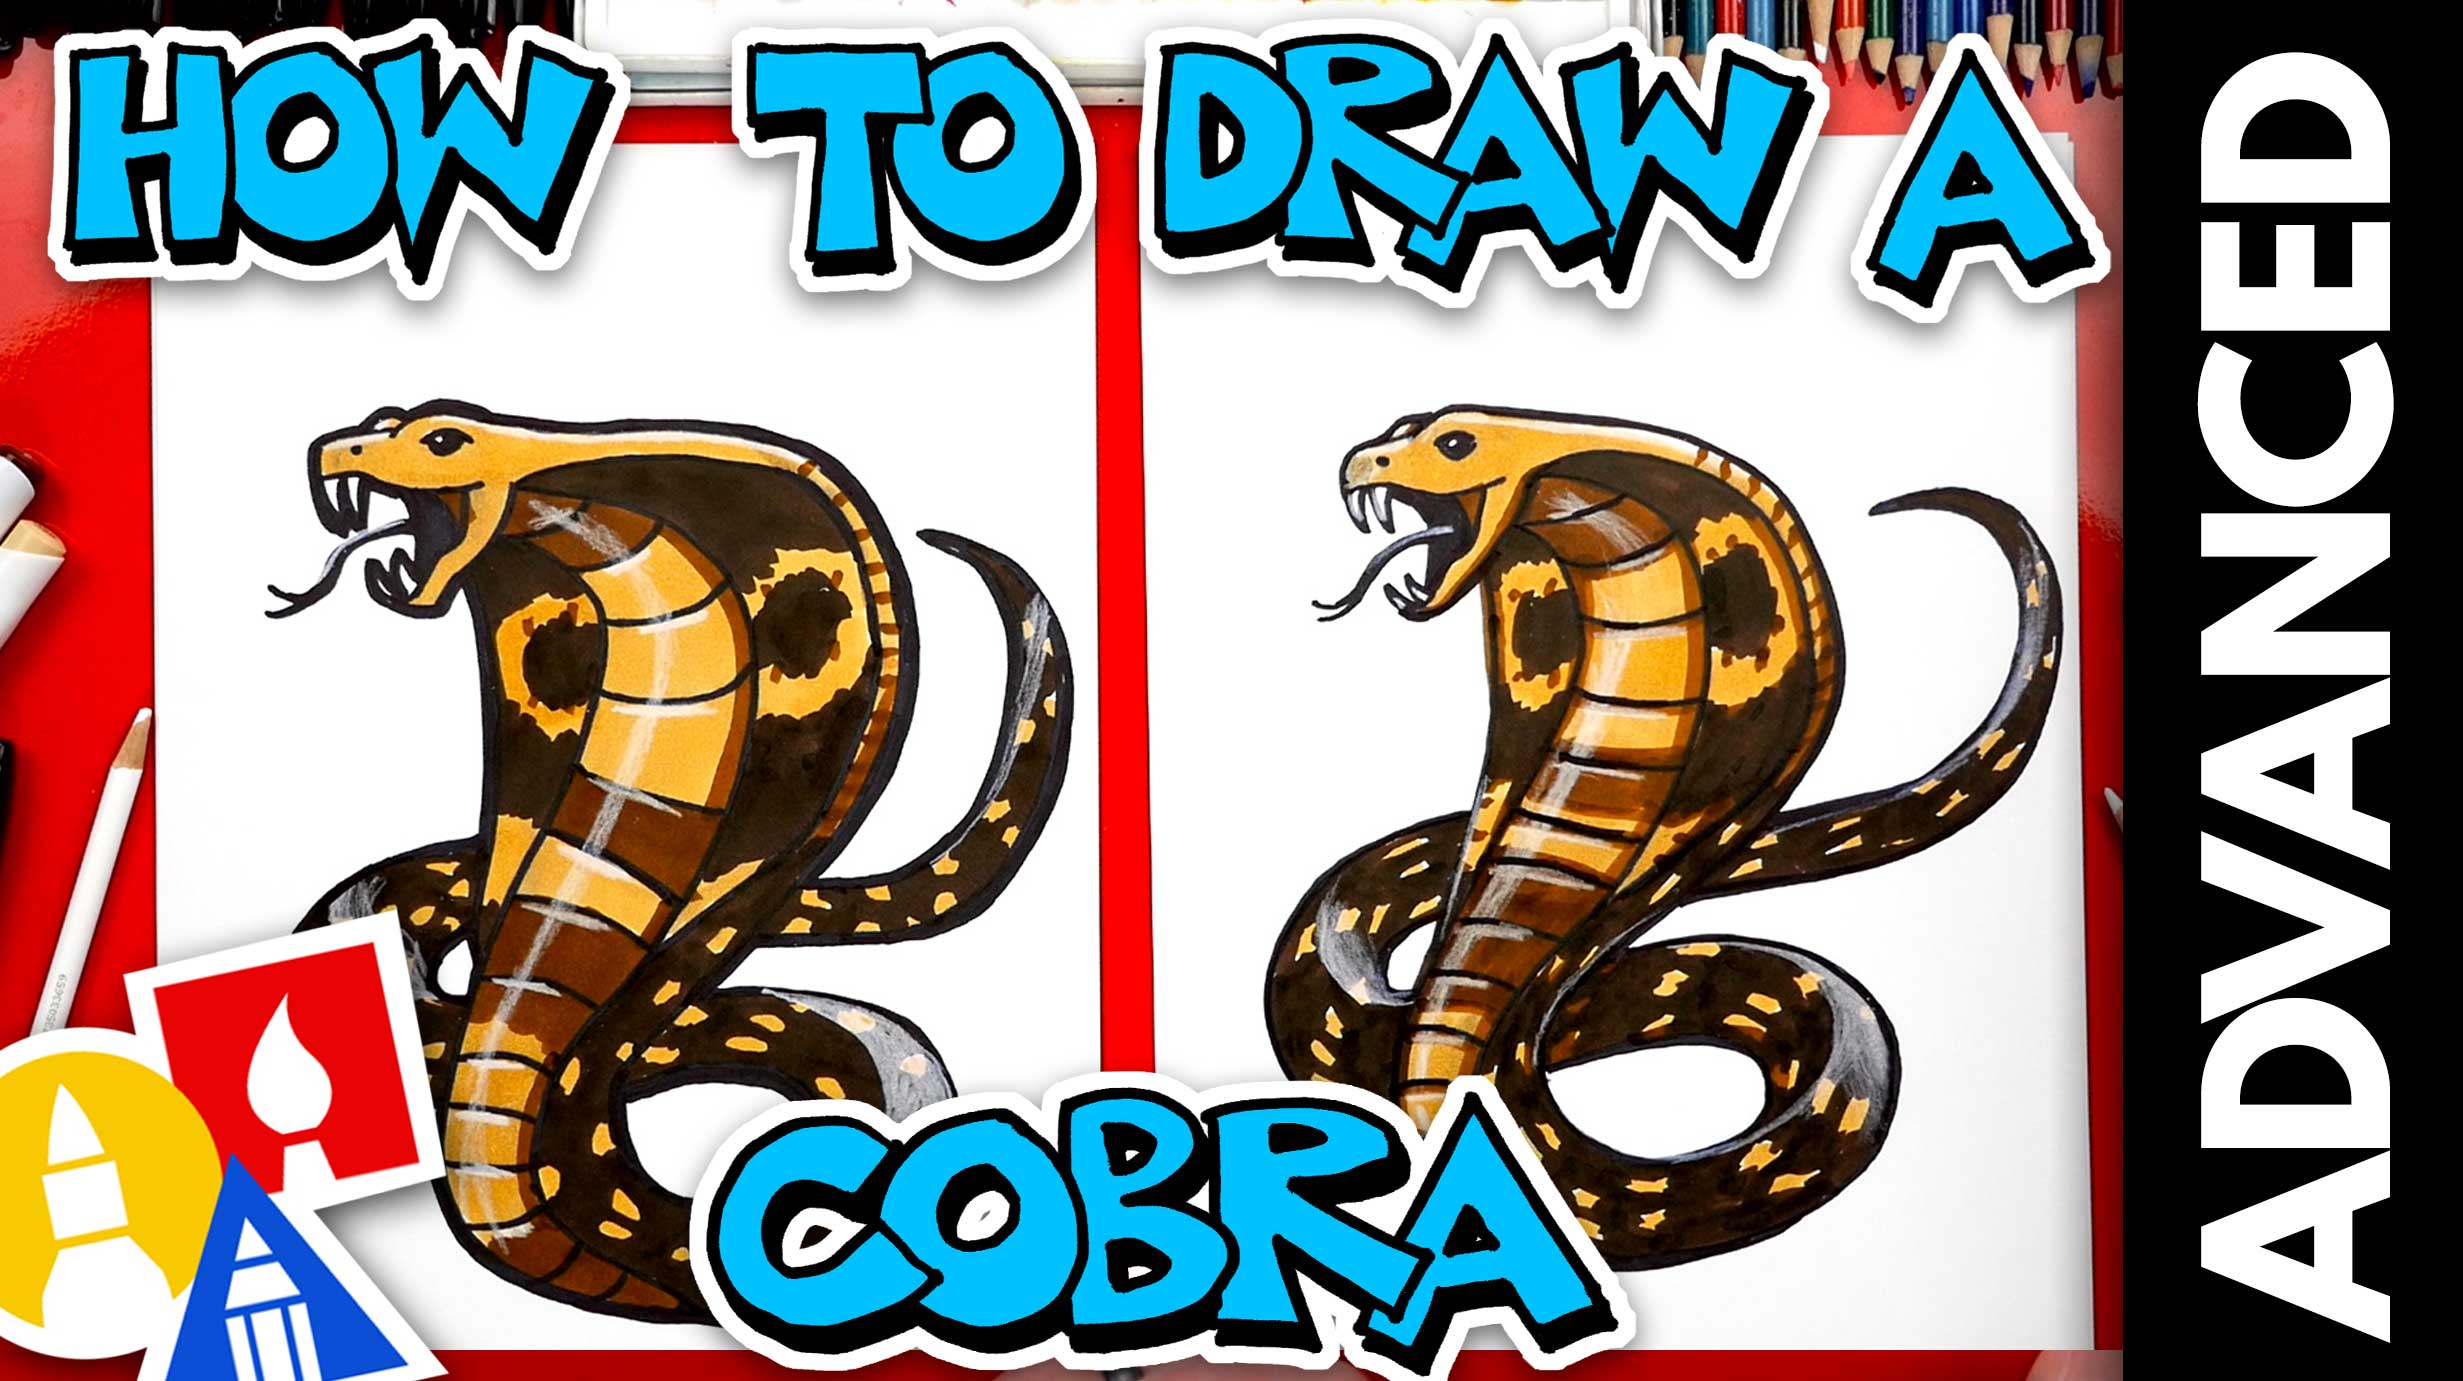 15,458 Cobra Drawing Royalty-Free Photos and Stock Images | Shutterstock